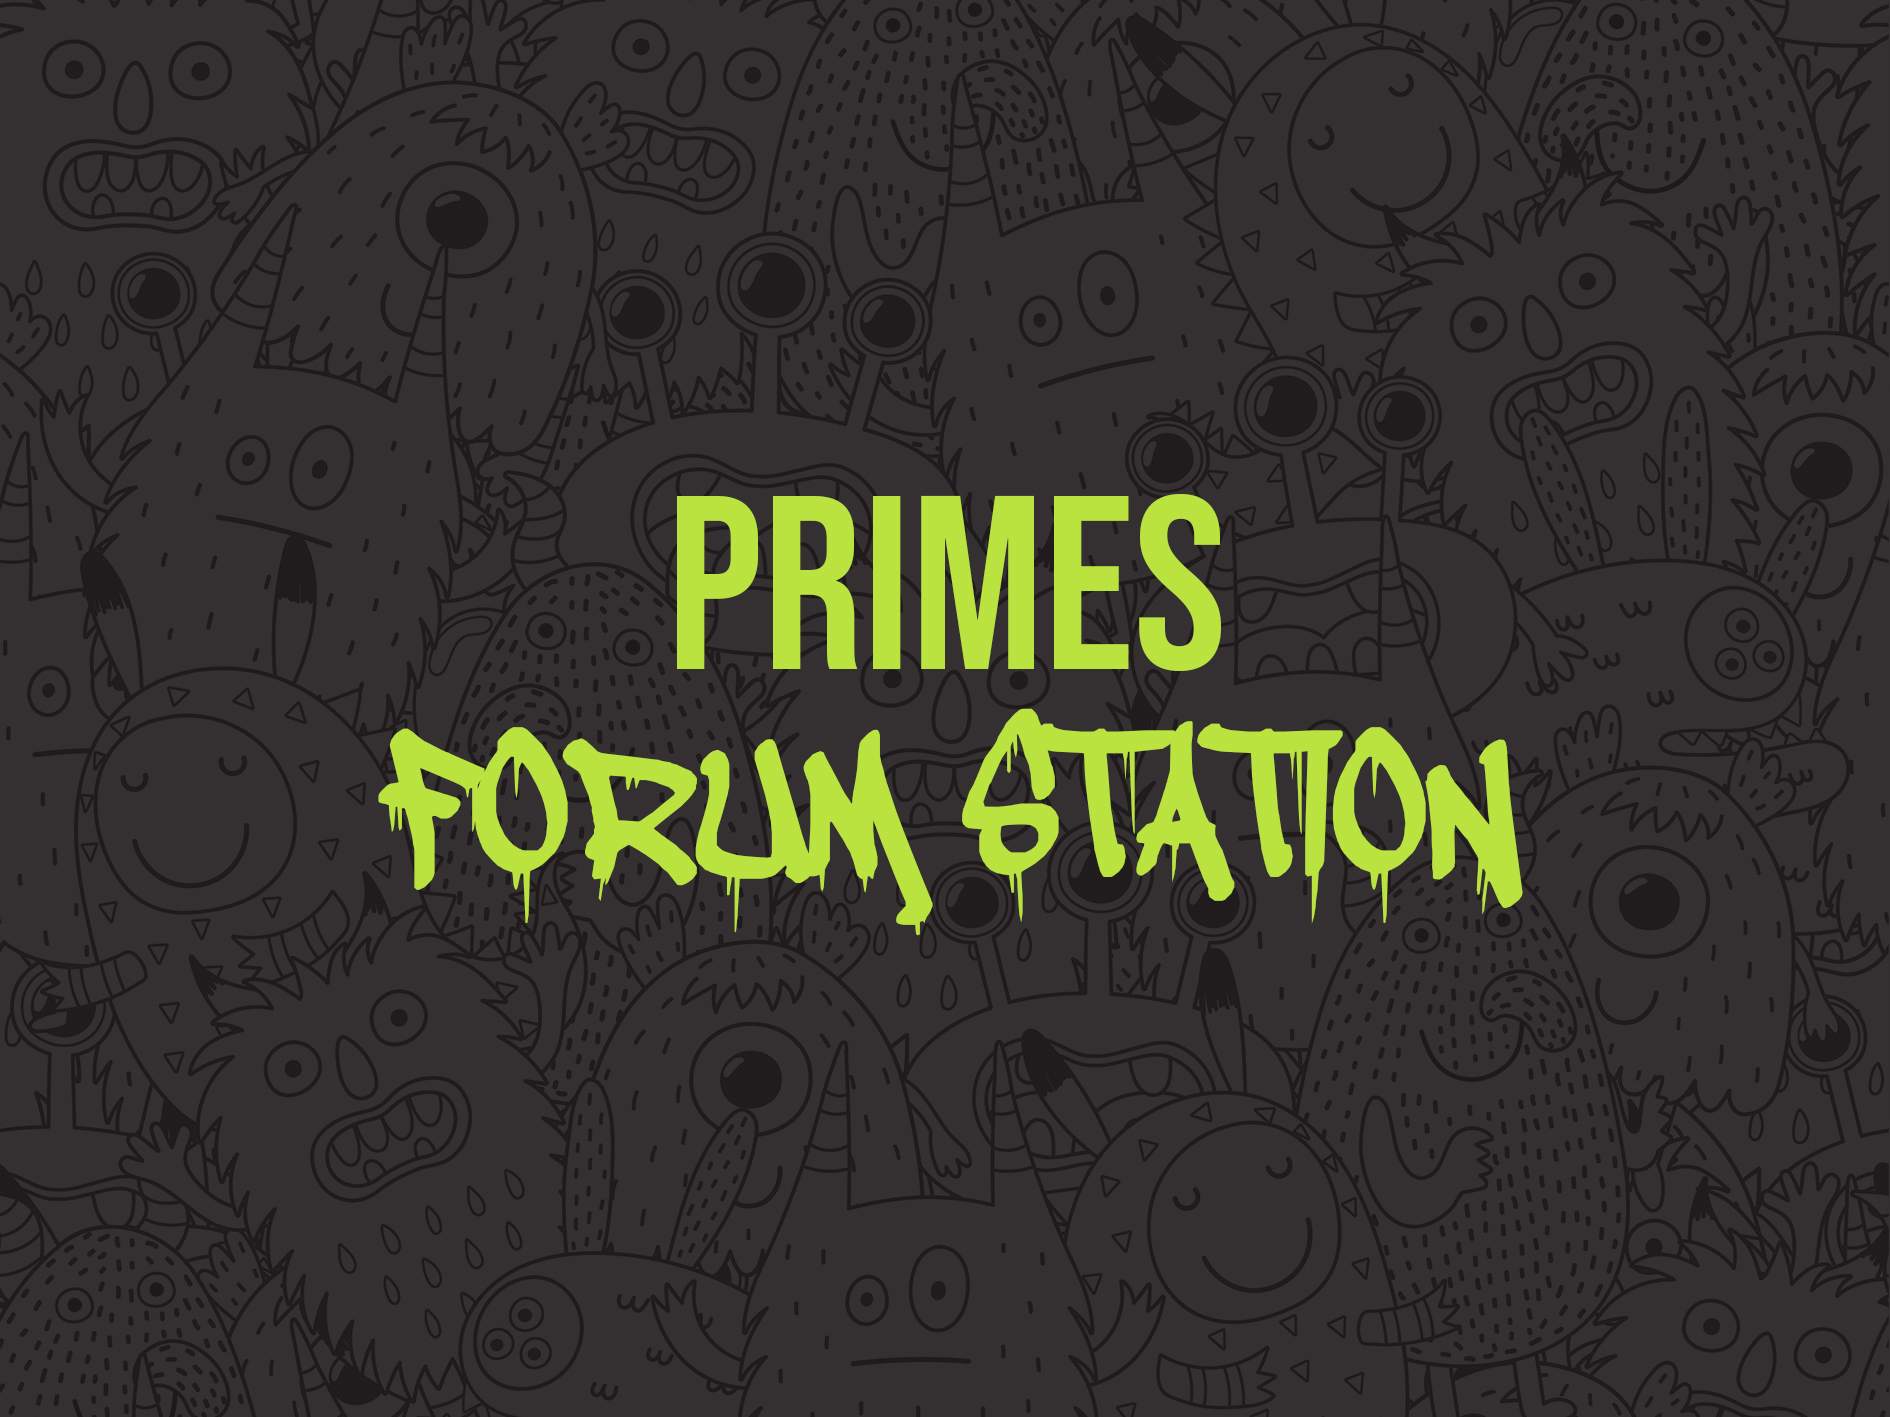 PRIMES at Forum Station(Black Bus) *Free Tickets - Limited Capacity - フライヤー表